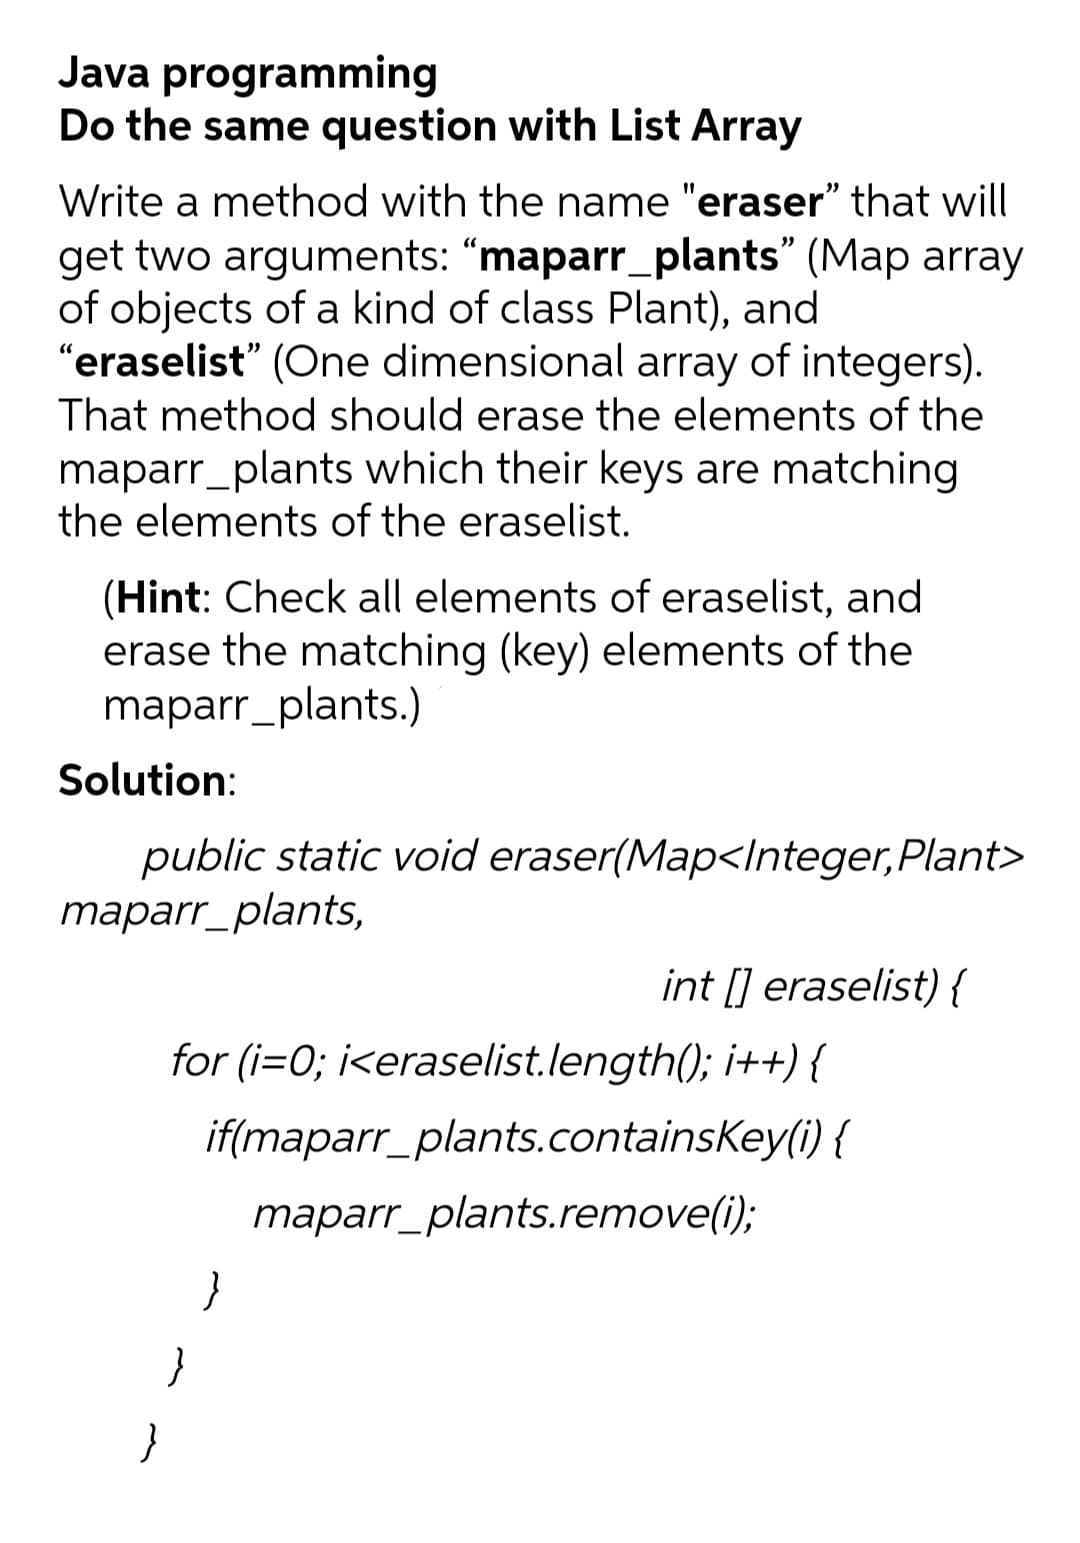 Java programming
Do the same question with List Array
Write a method with the name "eraser" that will
get two arguments: “maparr_plants" (Map array
of objects of a kind of class Plant), and
"eraselist" (One dimensional array of integers).
That method should erase the elements of the
maparr_plants which their keys are matching
the elements of the eraselist.
(Hint: Check all elements of eraselist, and
erase the matching (key) elements of the
maparr_plants.)
Solution:
public static void eraser(Map<Integer,Plant>
maparr_plants,
int [] eraselist) {
for (i=0; i<eraselist.length(); i++) {
if(maparr_plants.containsKey(i) {
maparr_plants.remove(i);
}
}
